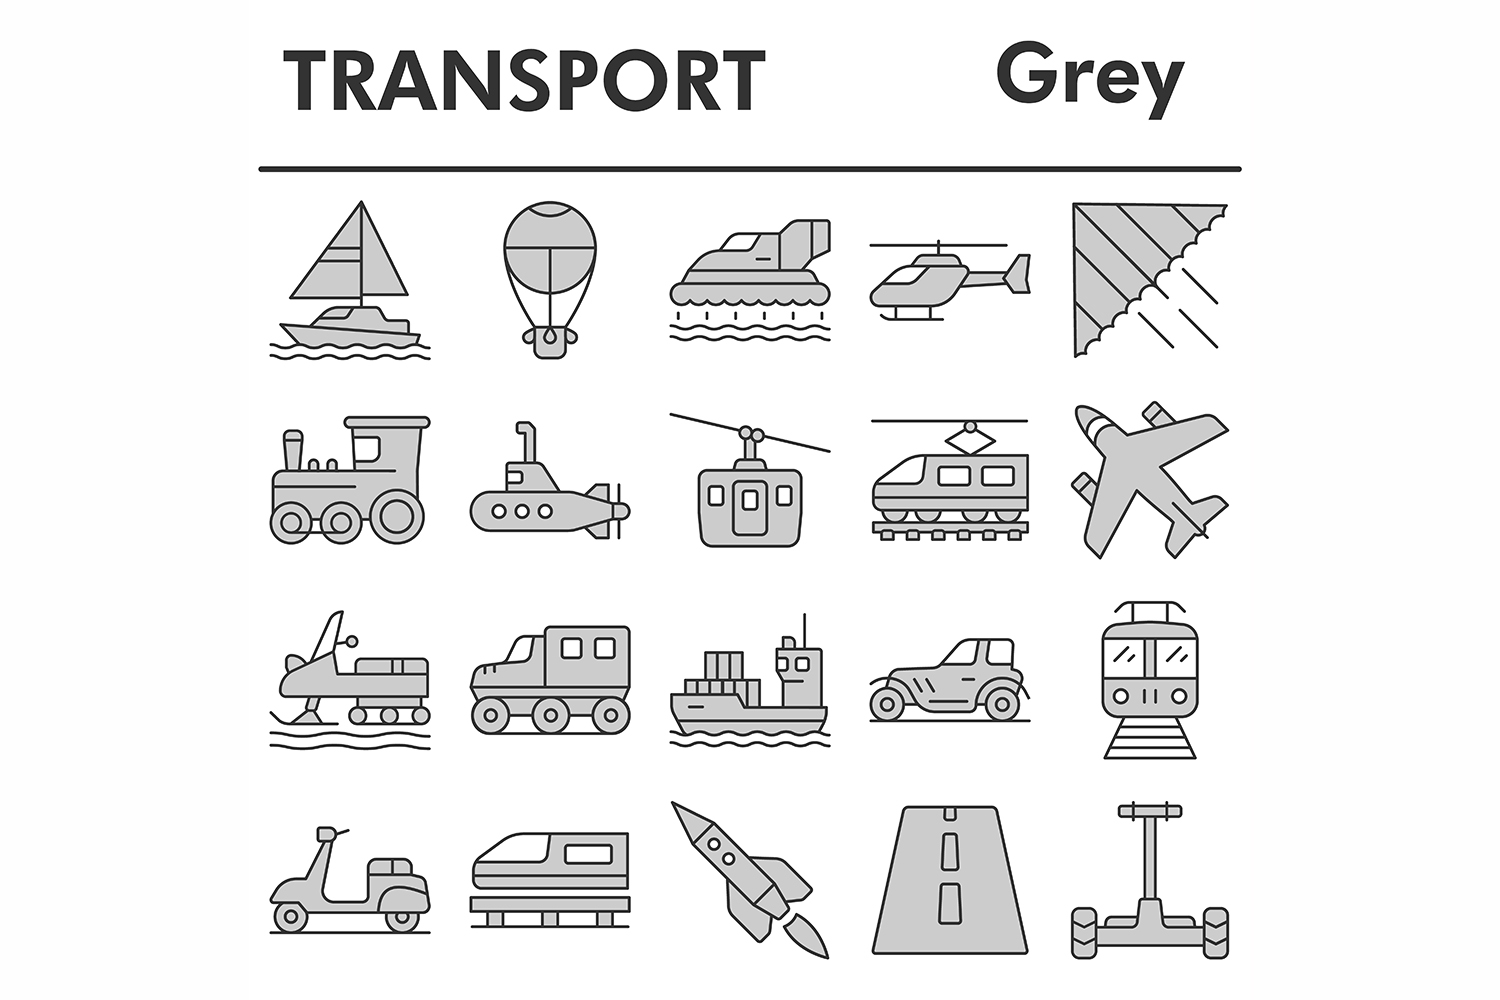 Transport icons set, gray style pinterest preview image.